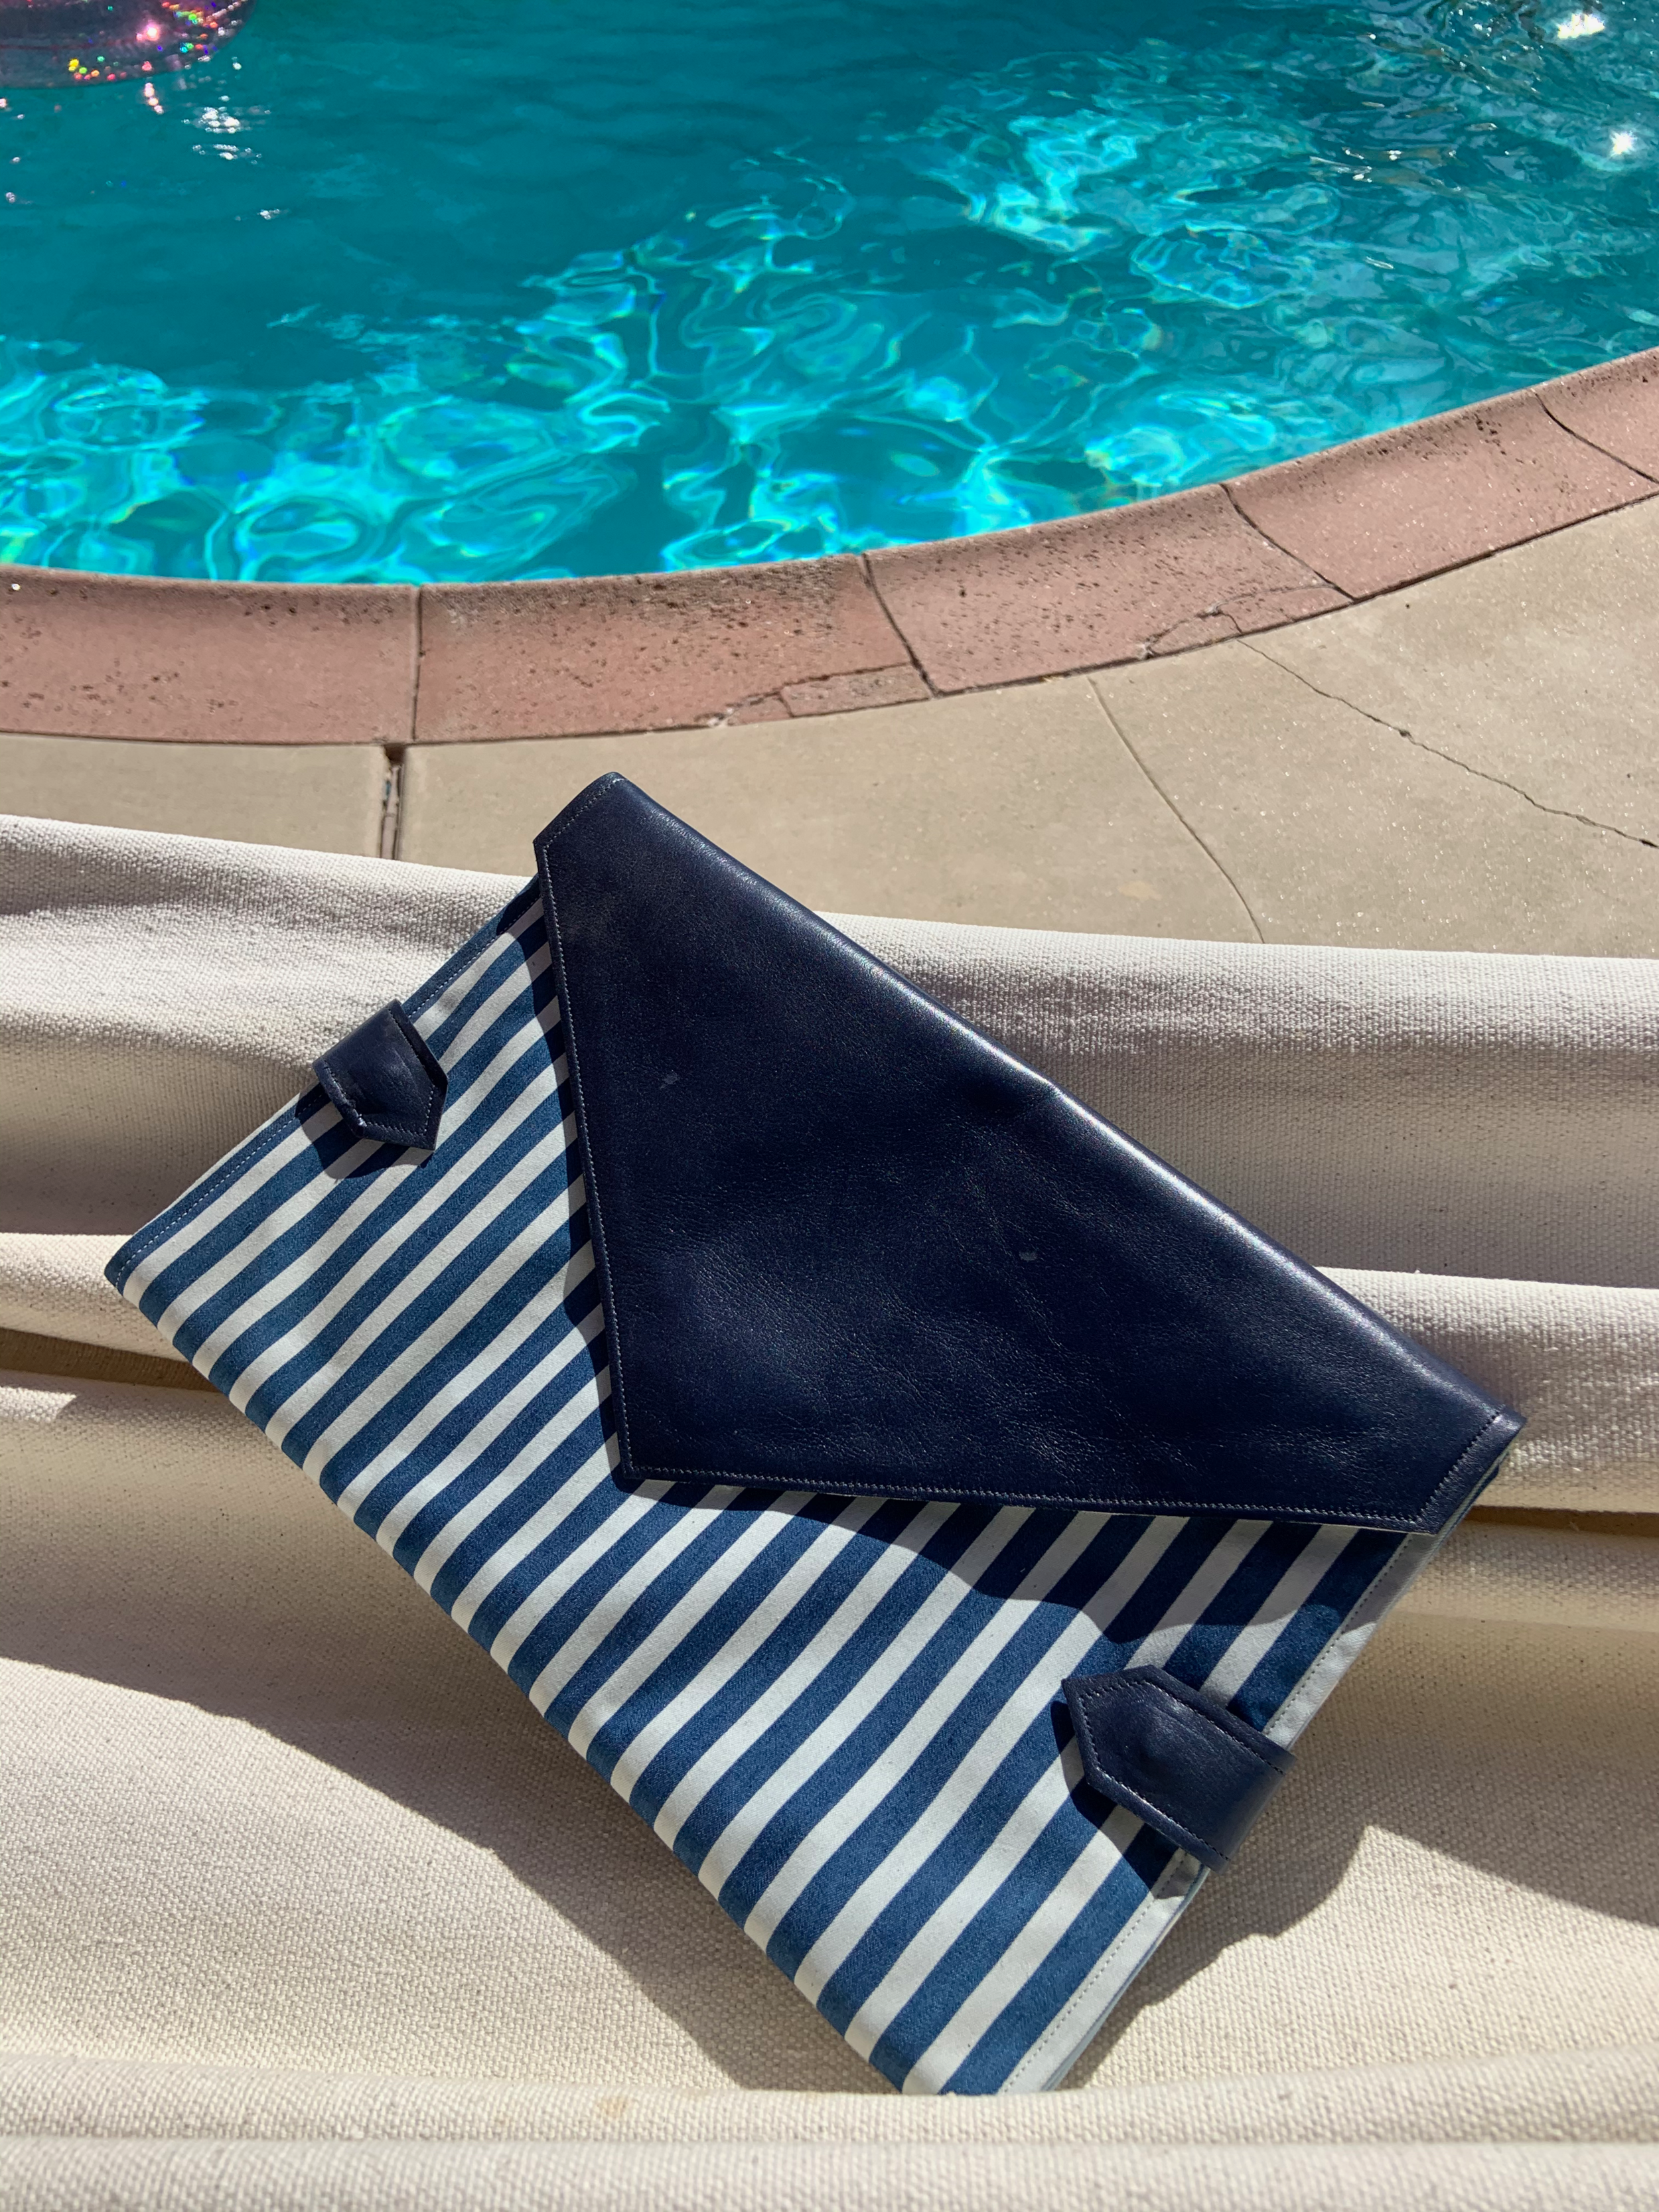 Striped Blue CC by the pool.png